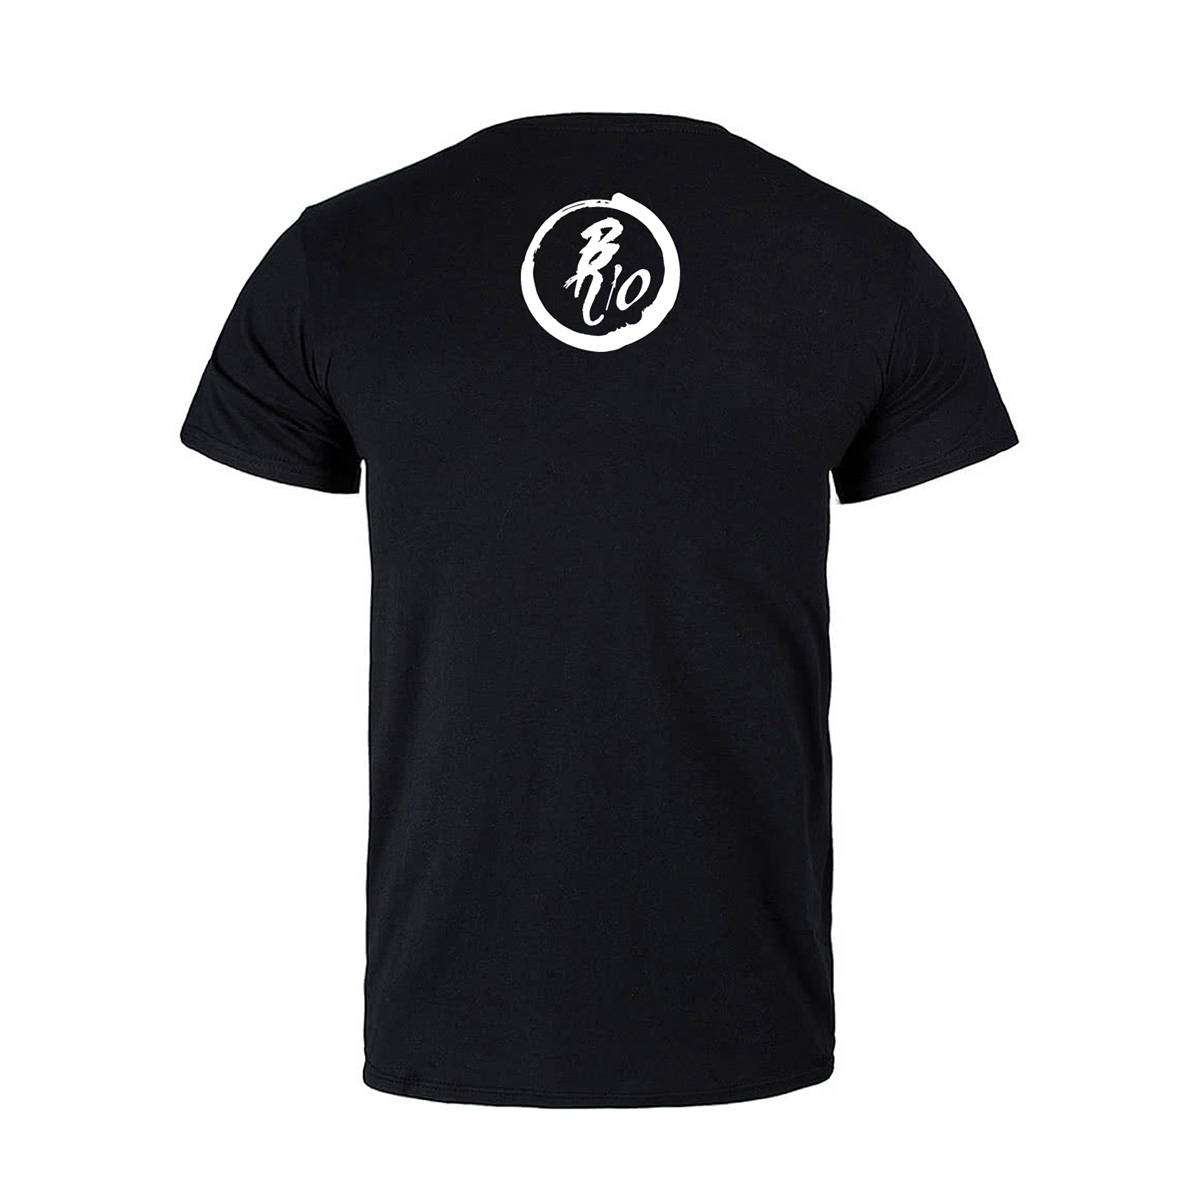 BR10 Never Forget Shirt | PERFORMAX SPORTS